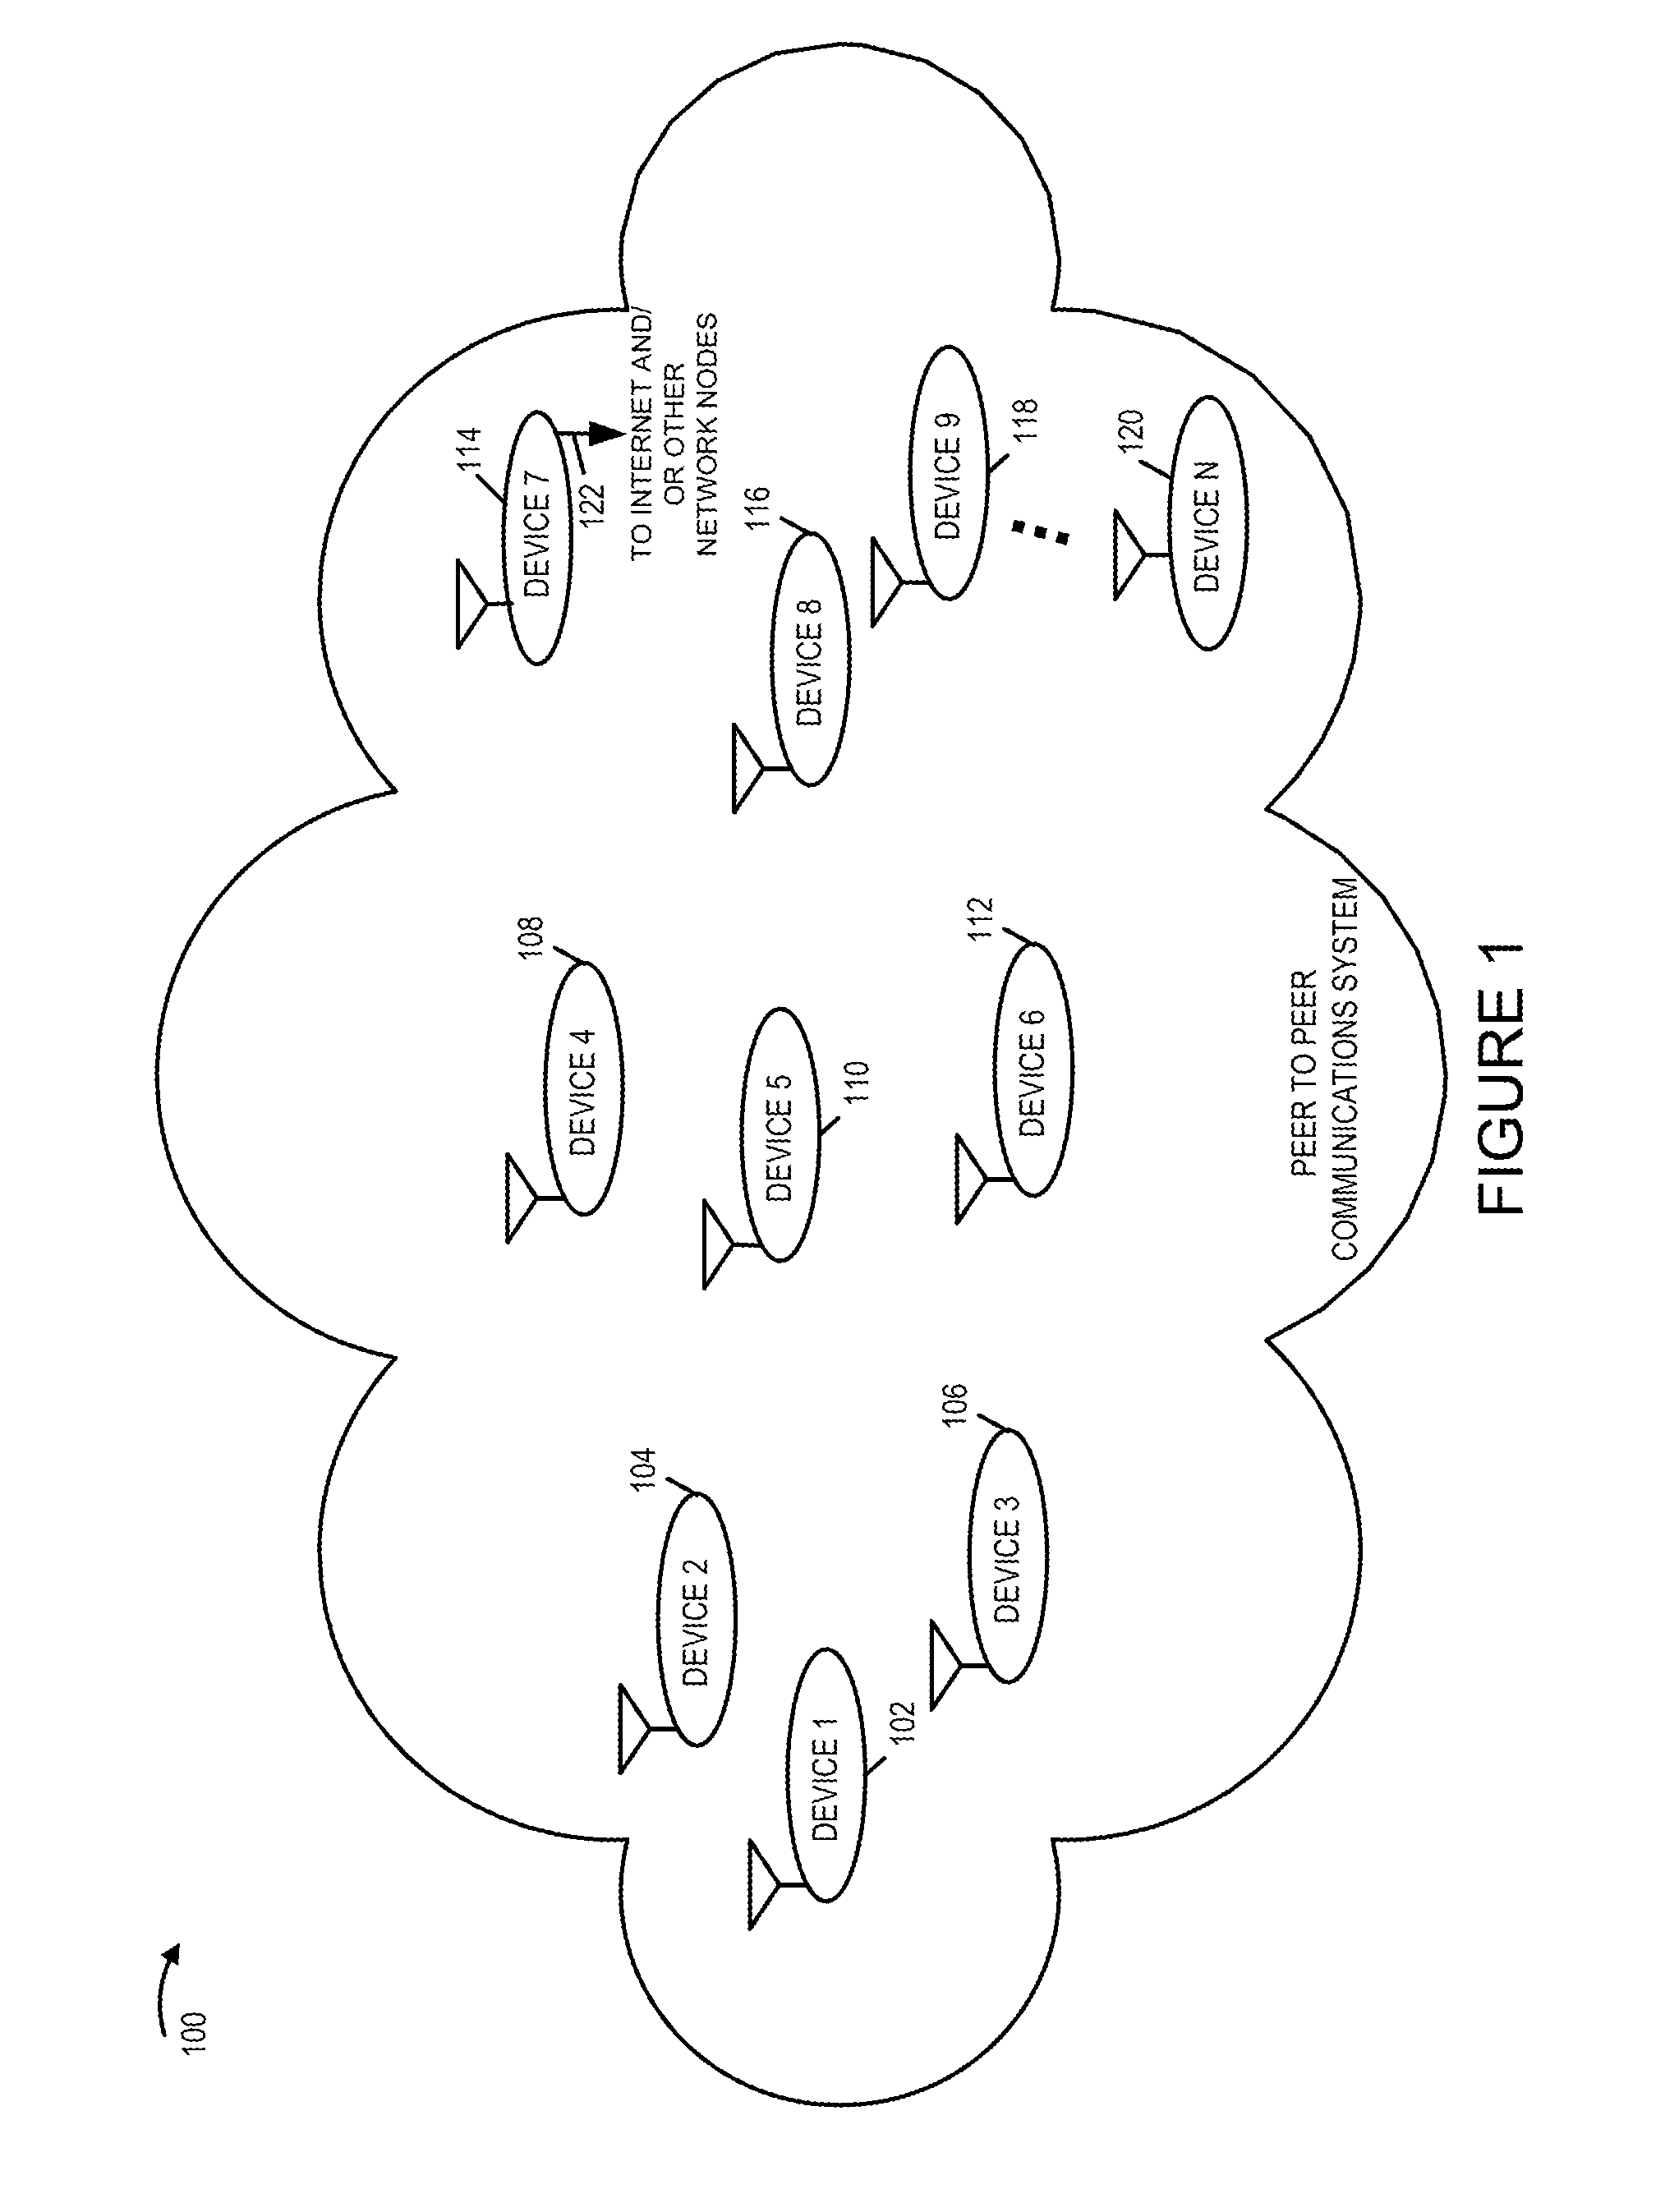 Methods and apparatus for paging in wireless communication networks